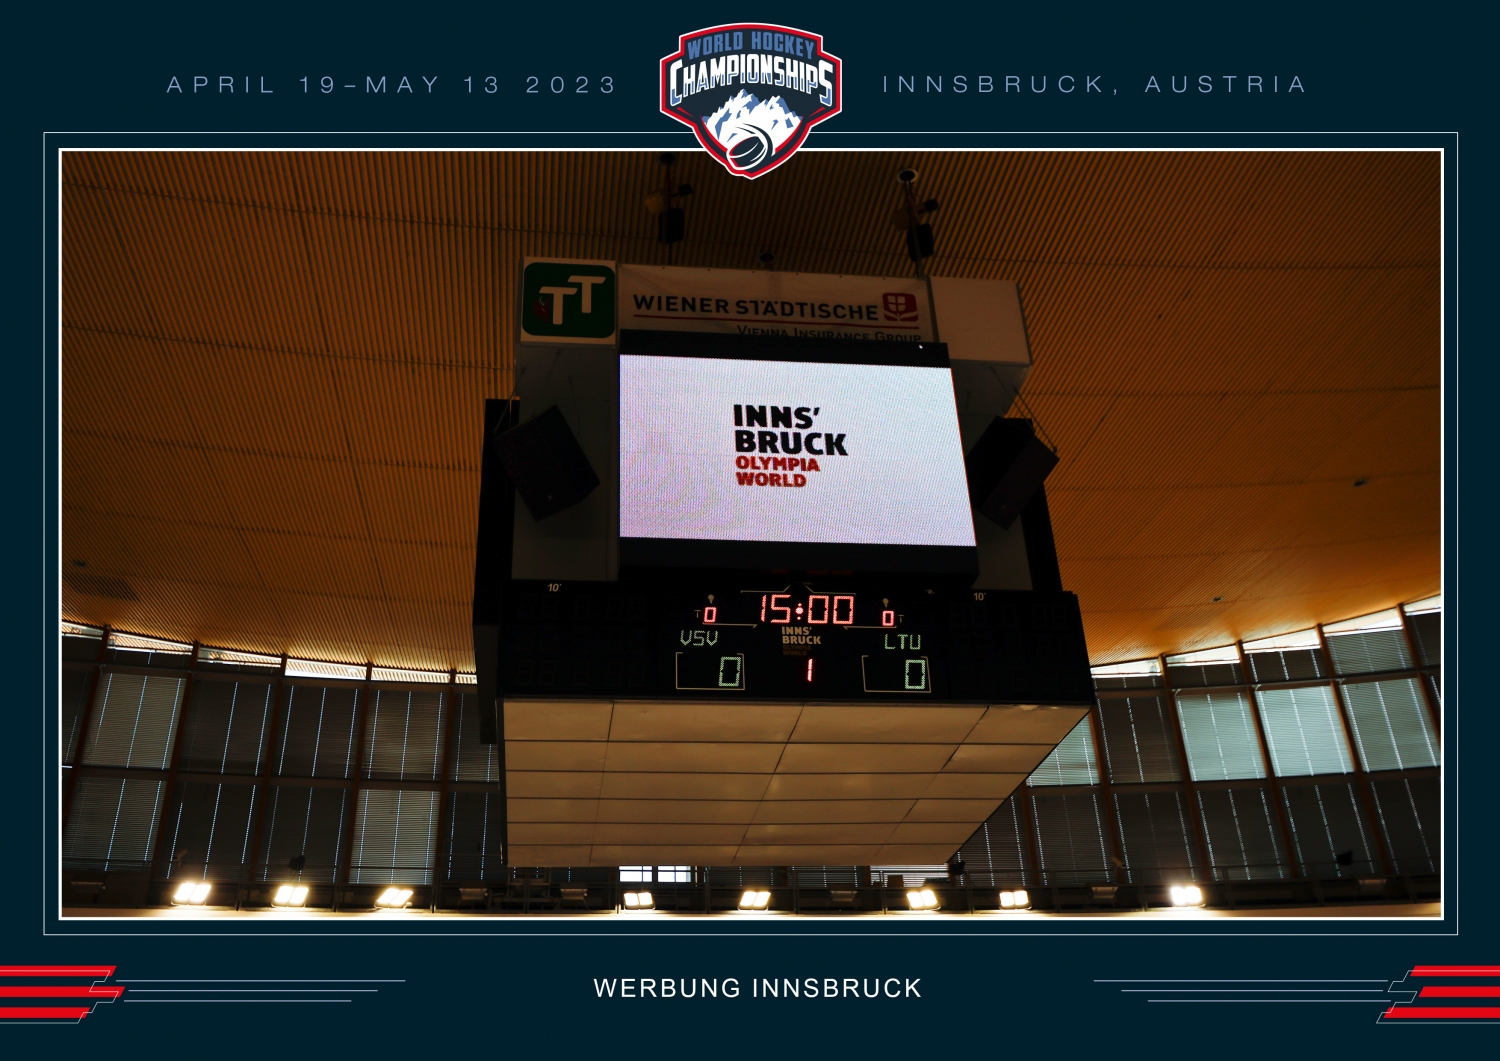 Preview Promotion Olympia World at the video wall.jpg